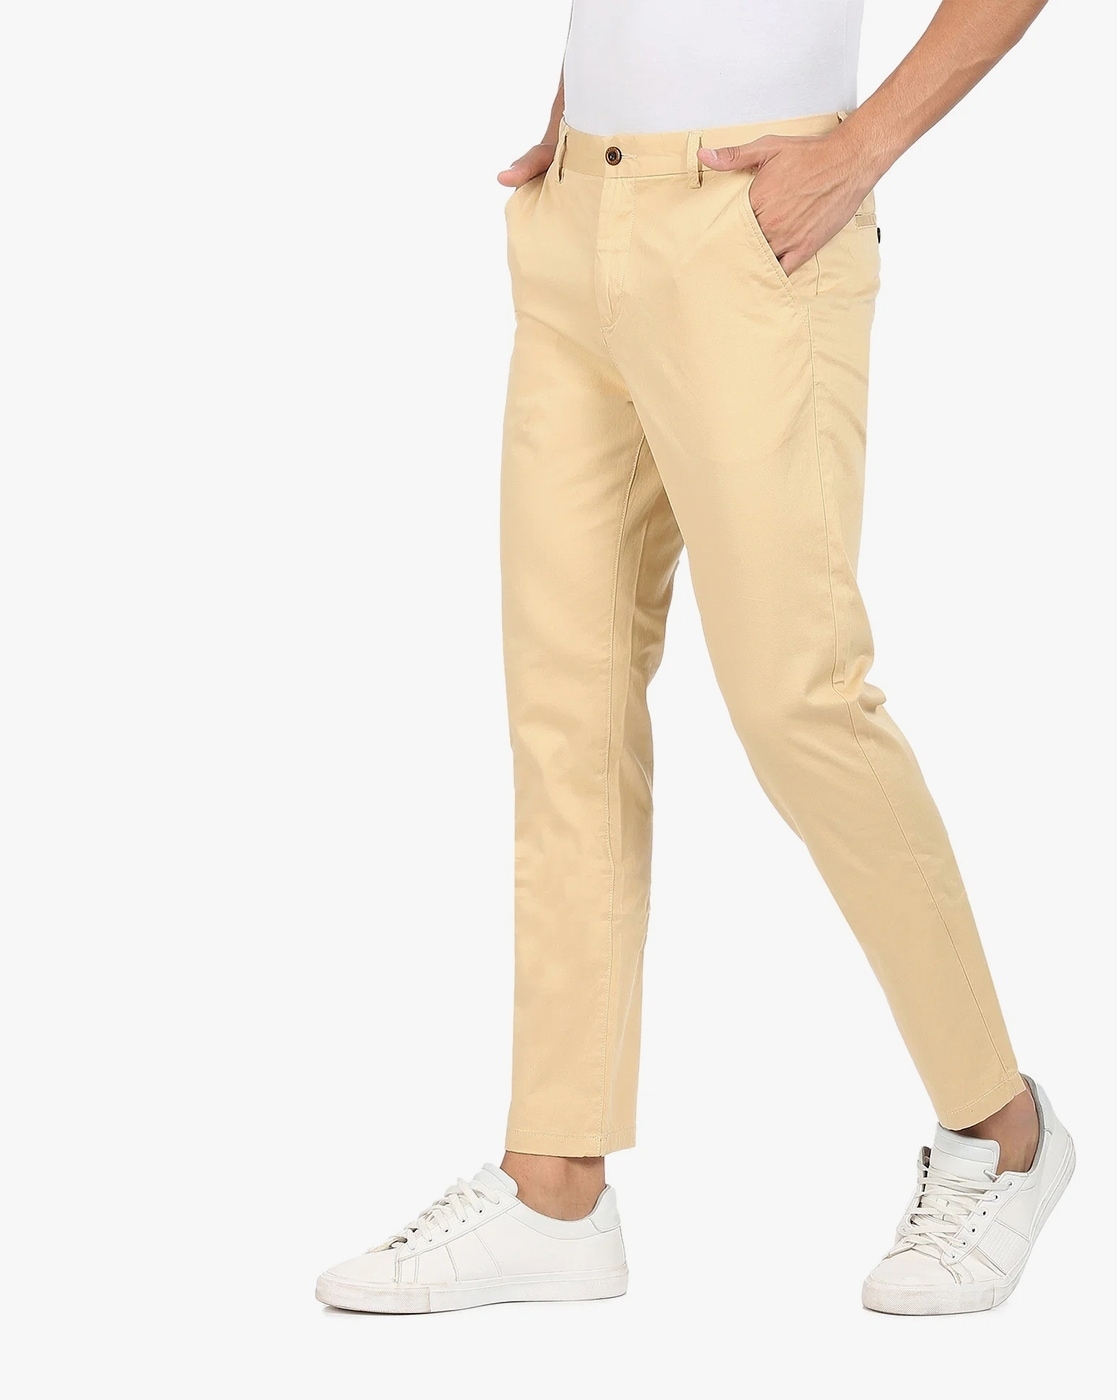 Arrow Men Khaki Regular Fit Solid Formal Trousers Buy Arrow Men Khaki  Regular Fit Solid Formal Trousers Online at Best Price in India  NykaaMan